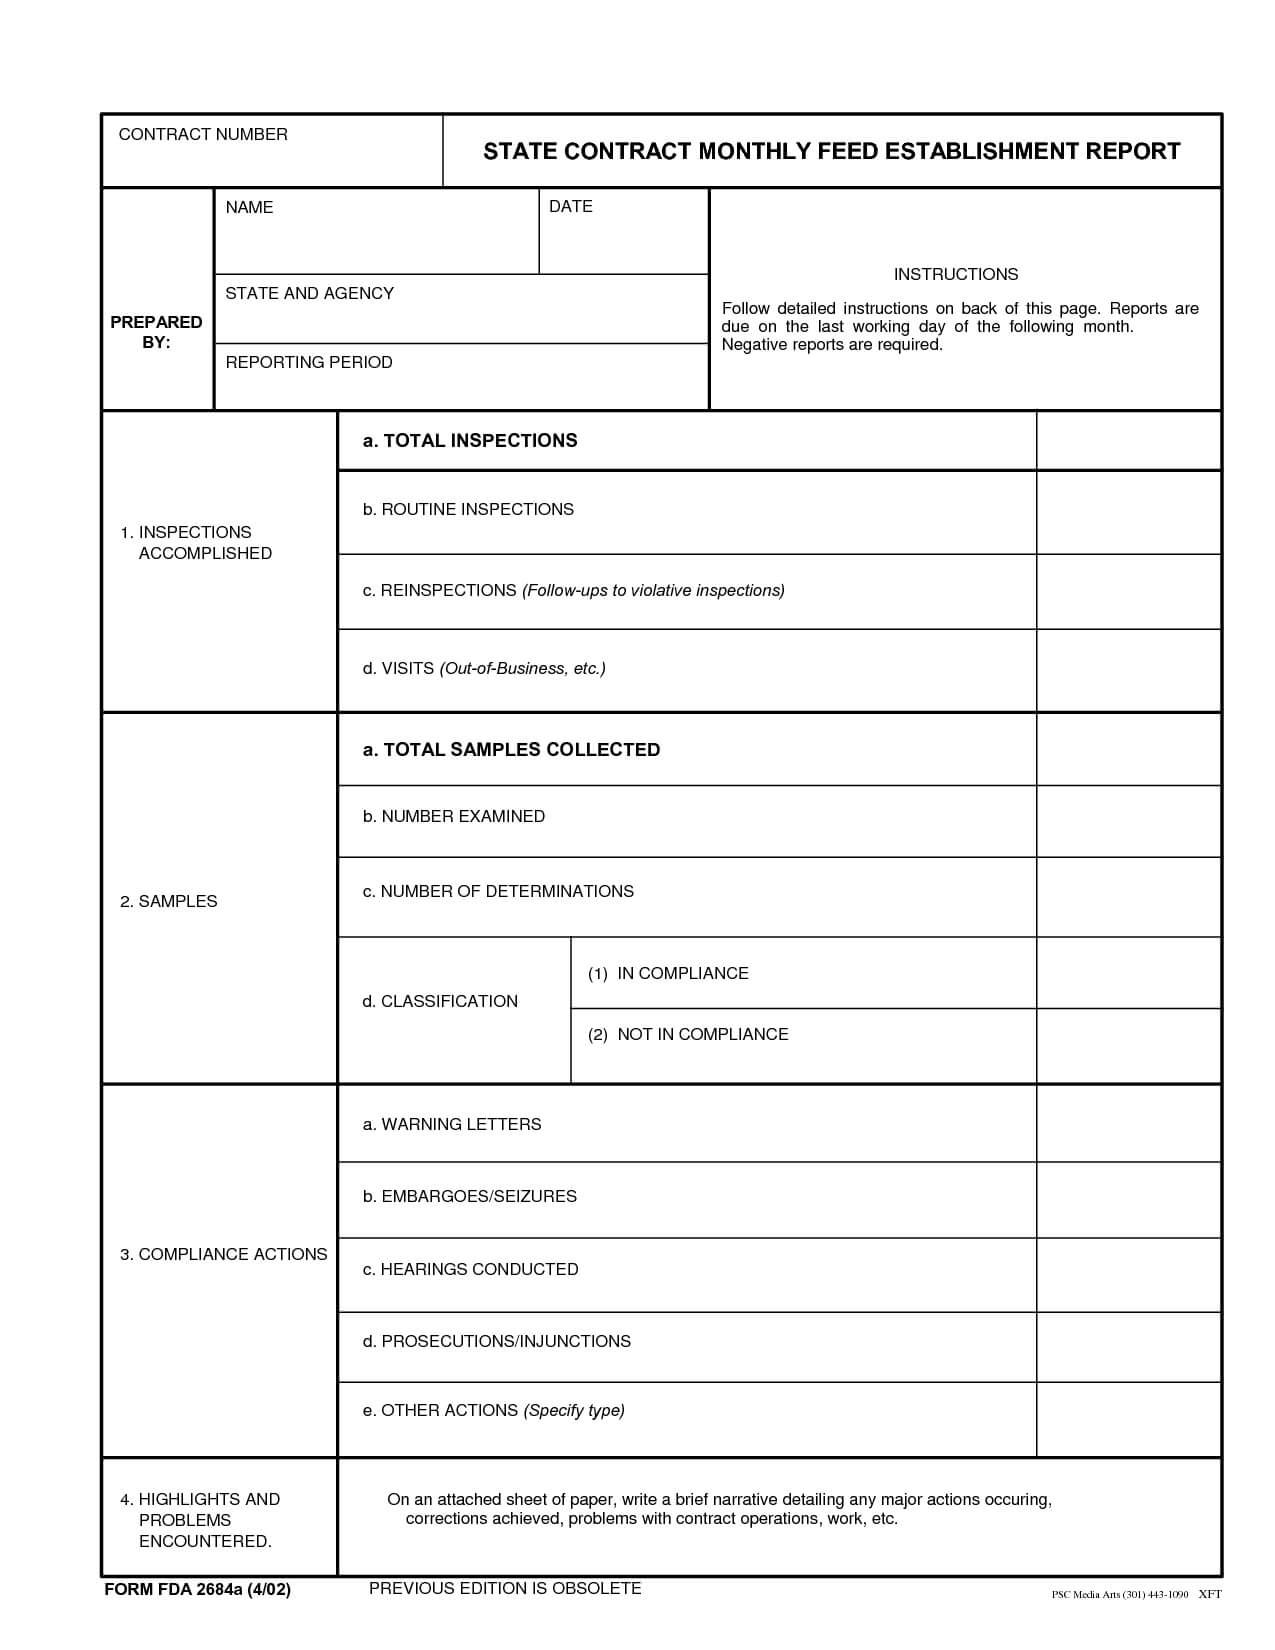 State Report Template ] - Printable Writing Templates With Regard To State Report Template